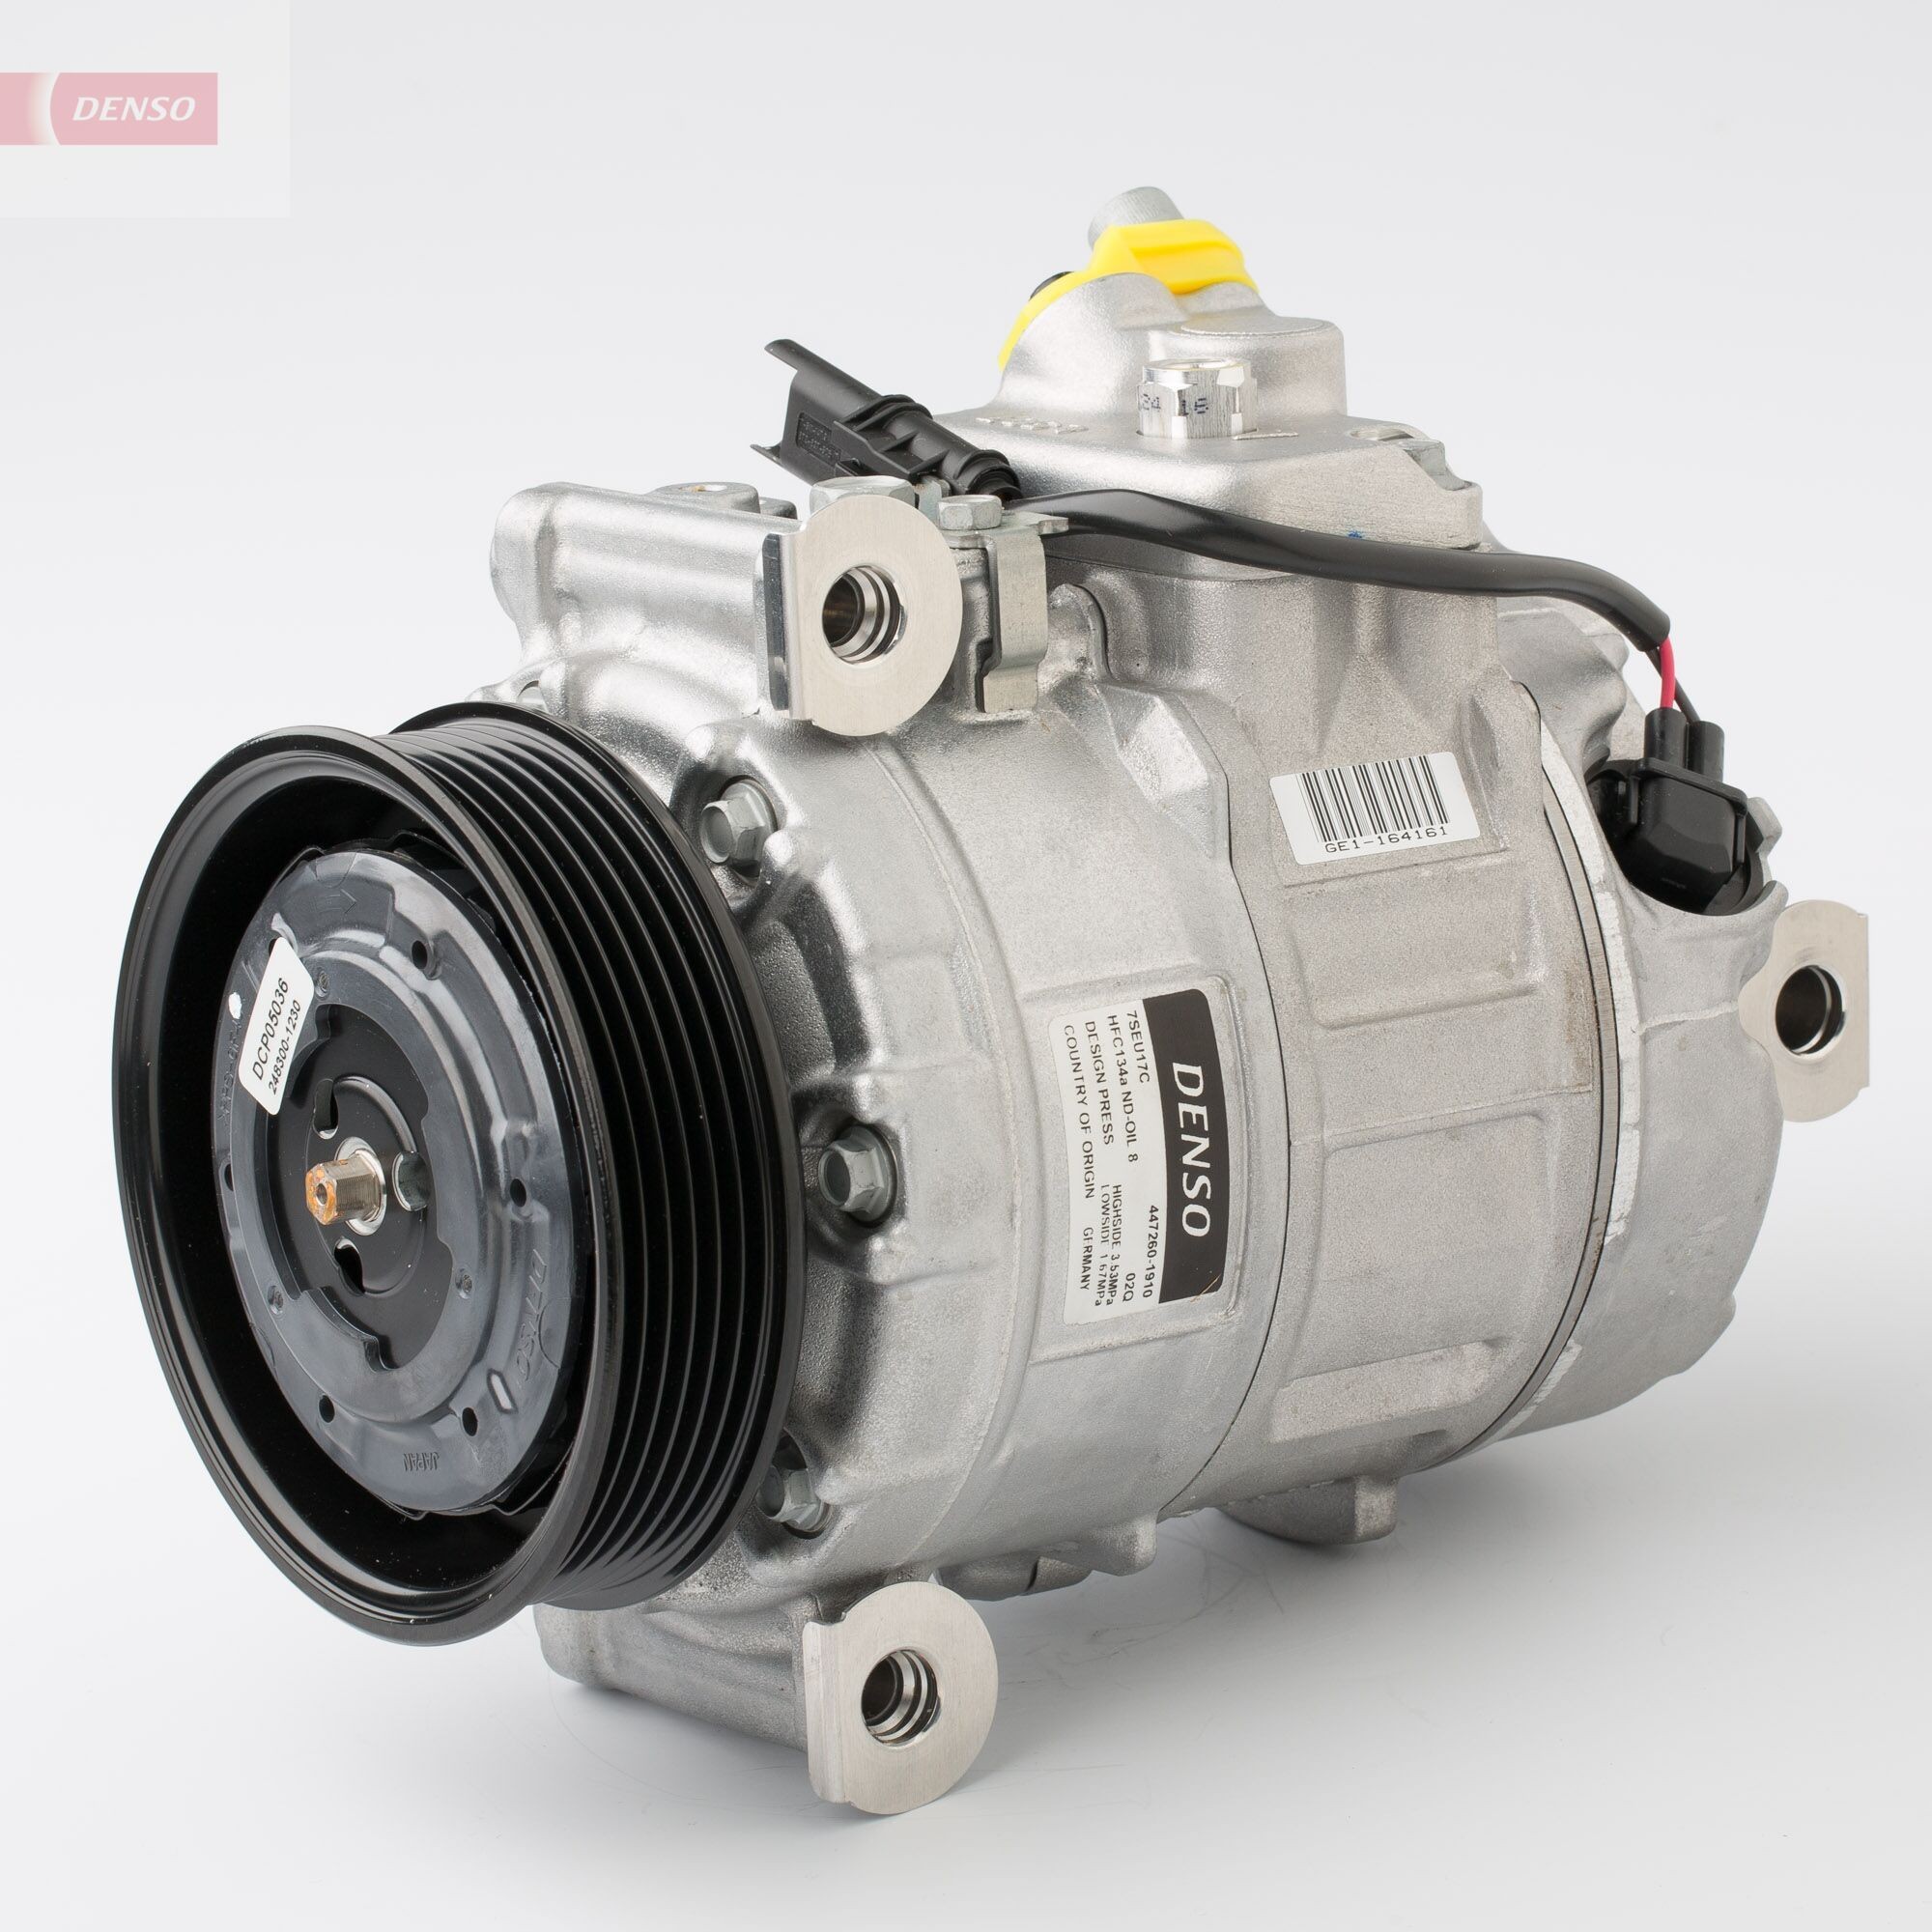 BMW X1 Air conditioning compressor DENSO DCP05036 cheap